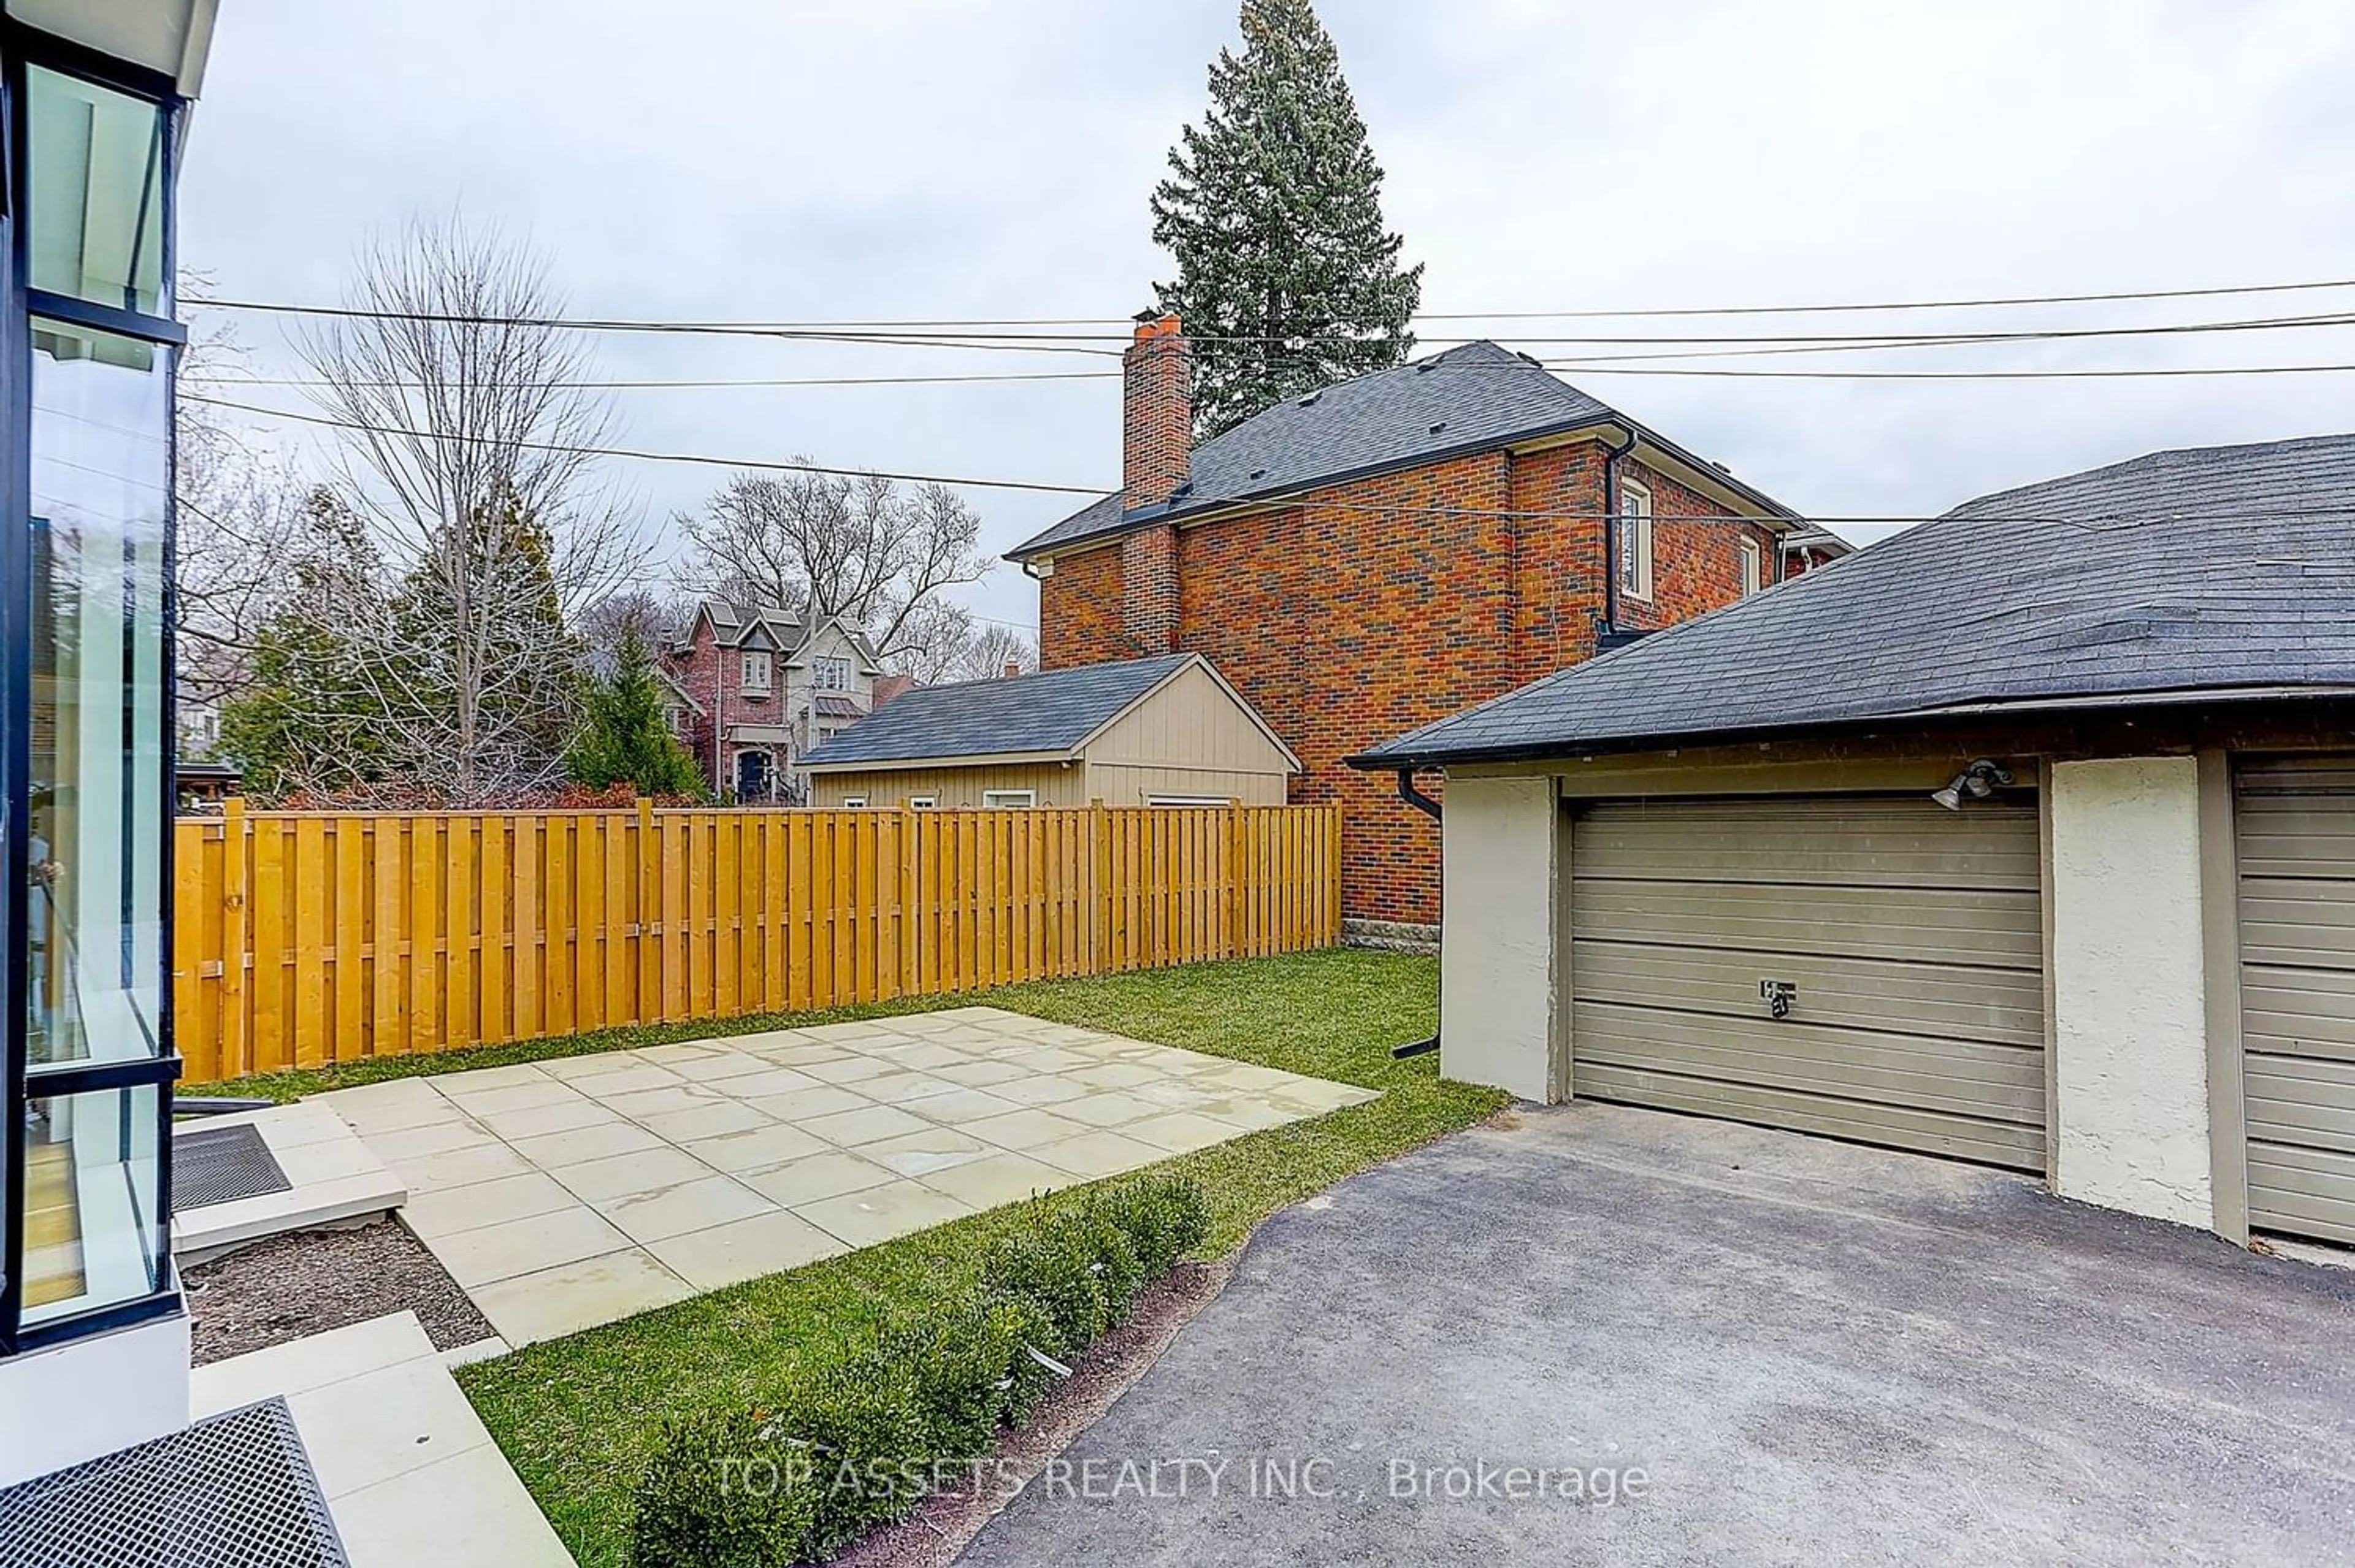 Fenced yard for 189 Wanless Ave, Toronto Ontario M4N 1W4